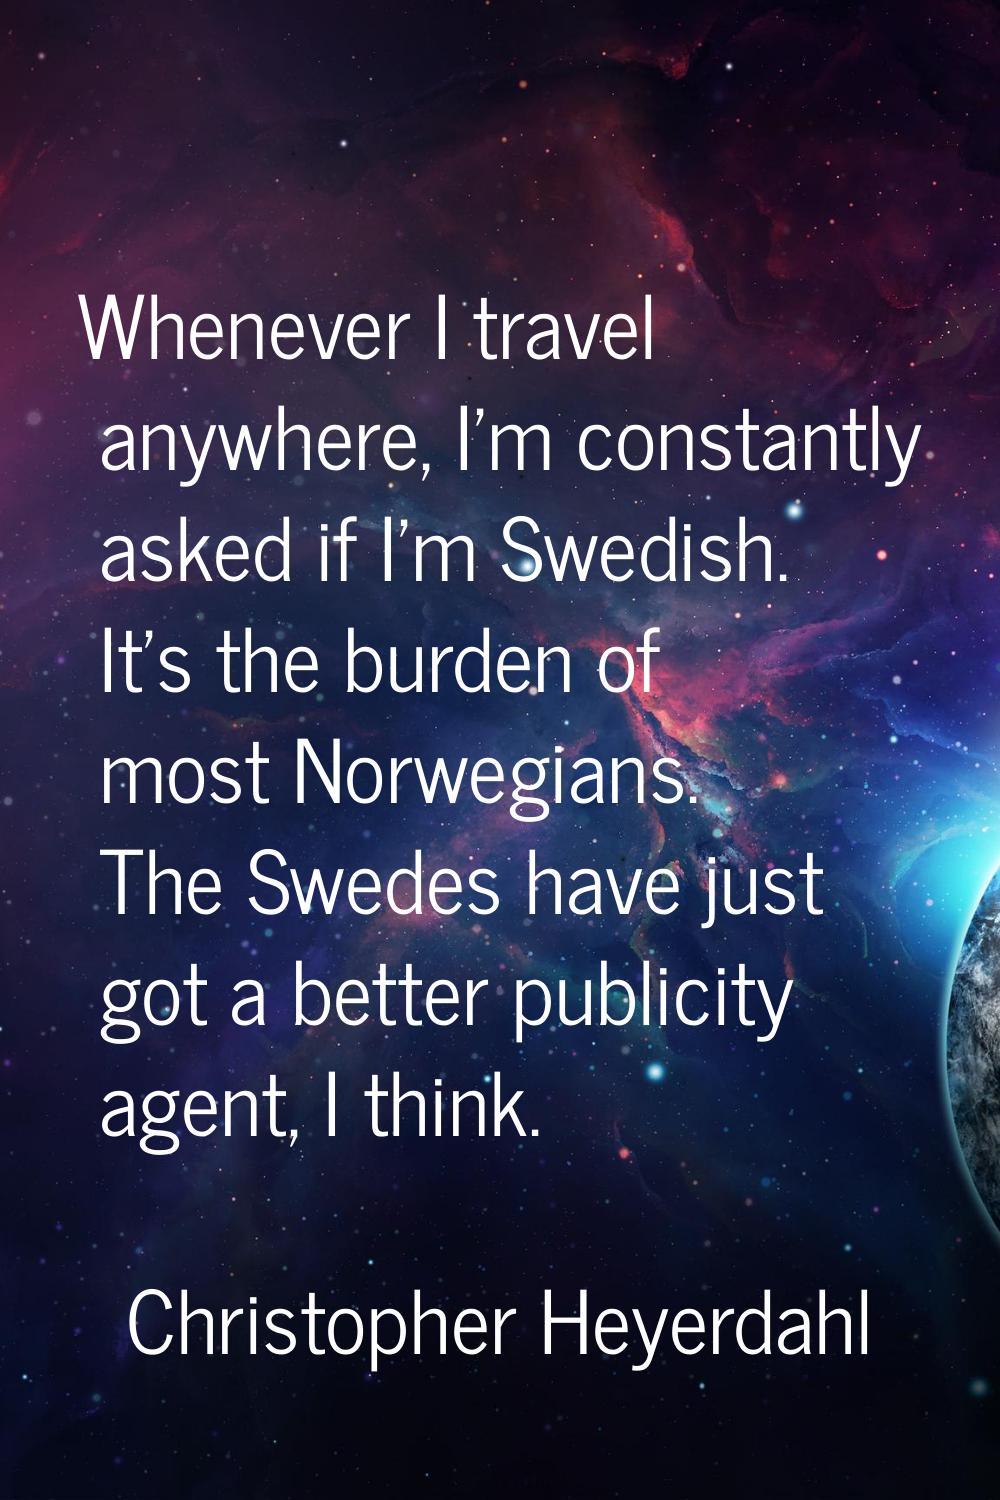 Whenever I travel anywhere, I'm constantly asked if I'm Swedish. It's the burden of most Norwegians